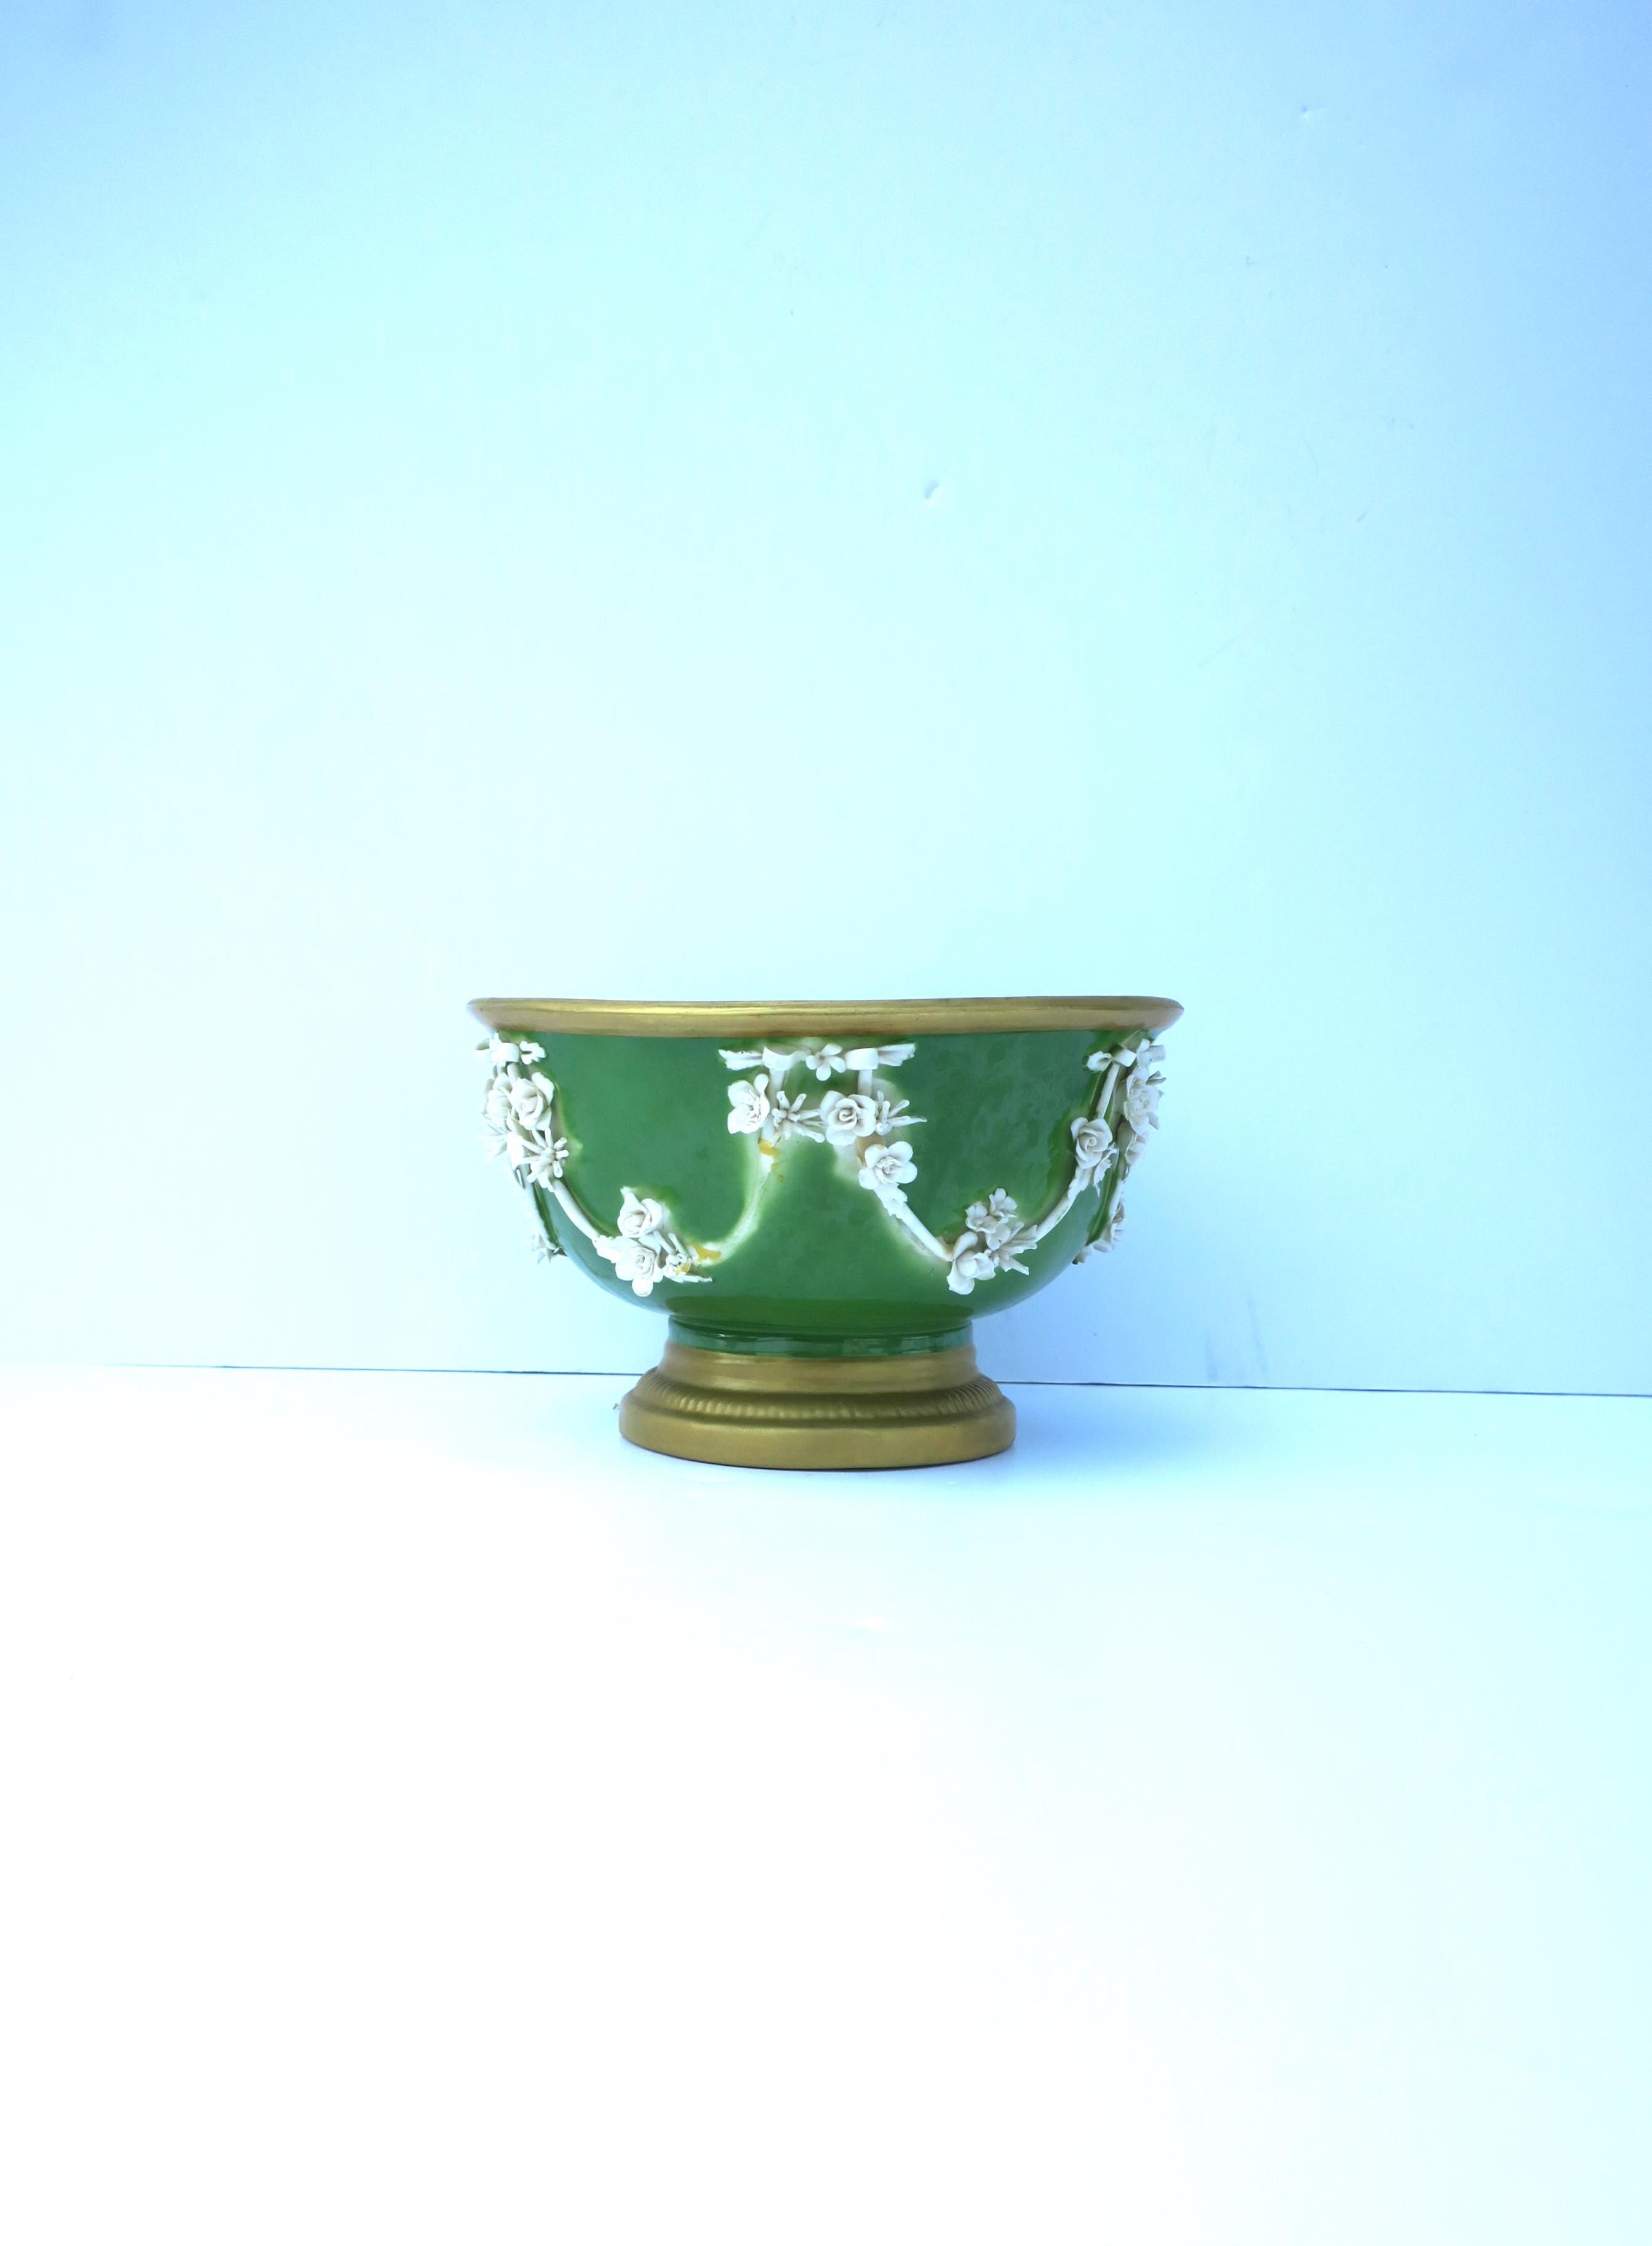 Italian Porcelain Footed Bowl Urn Neoclassical Style by Mottahedeh, 20th Century For Sale 5